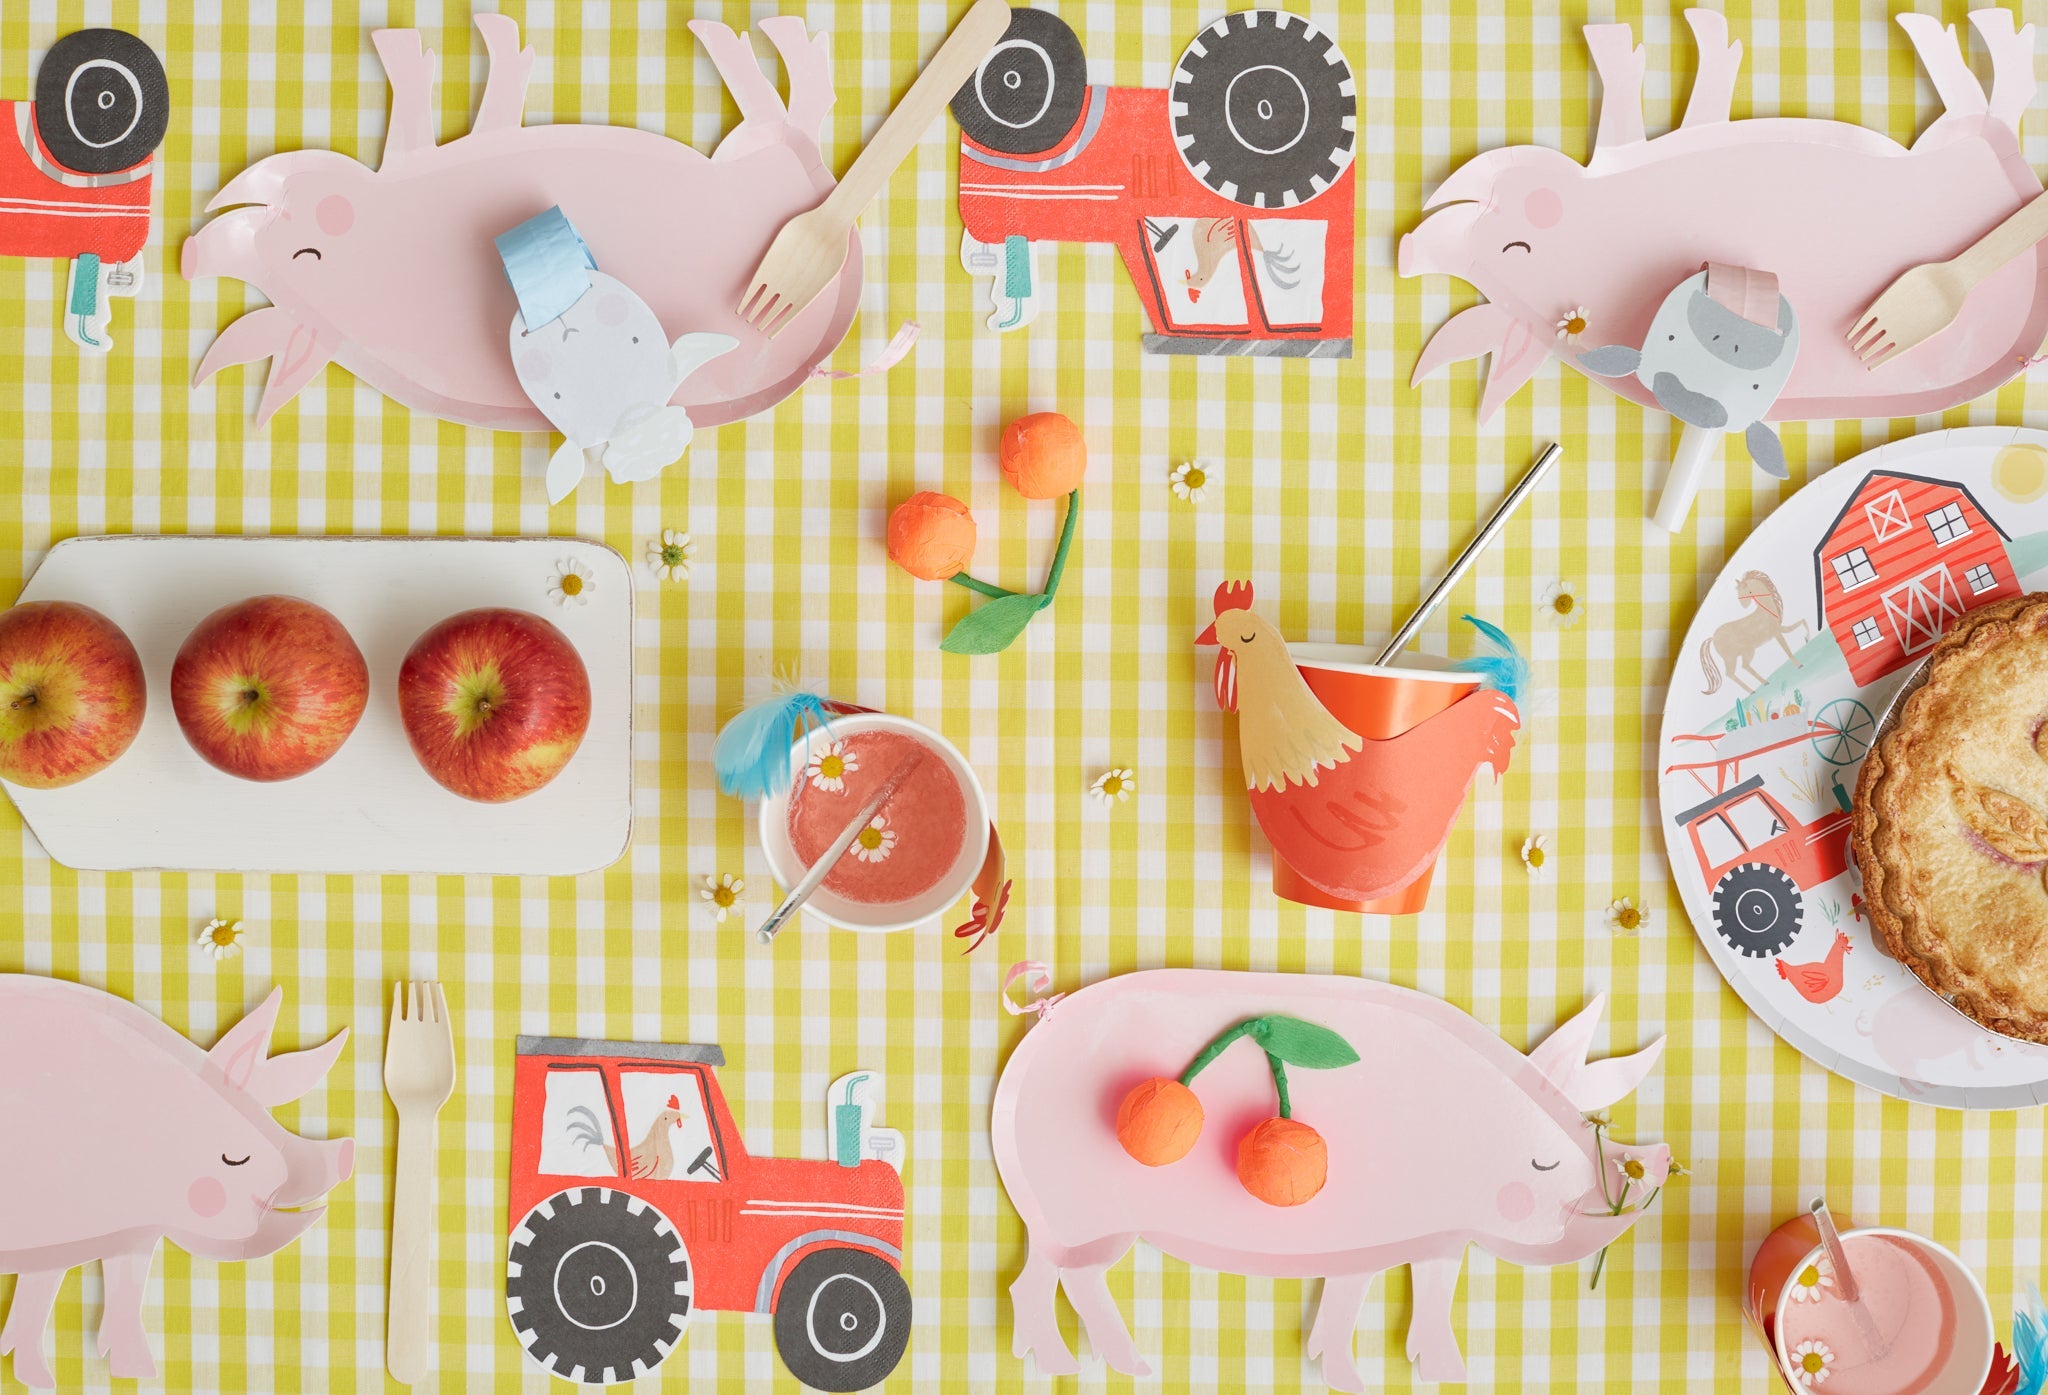 We love this colorful "On the Farm" tableware collection with their beautiful illustrations of a farmyard scene, complete with the farmhouse, a tractor, and farmyard animals! Perfect for baby shower or kids birthday party!